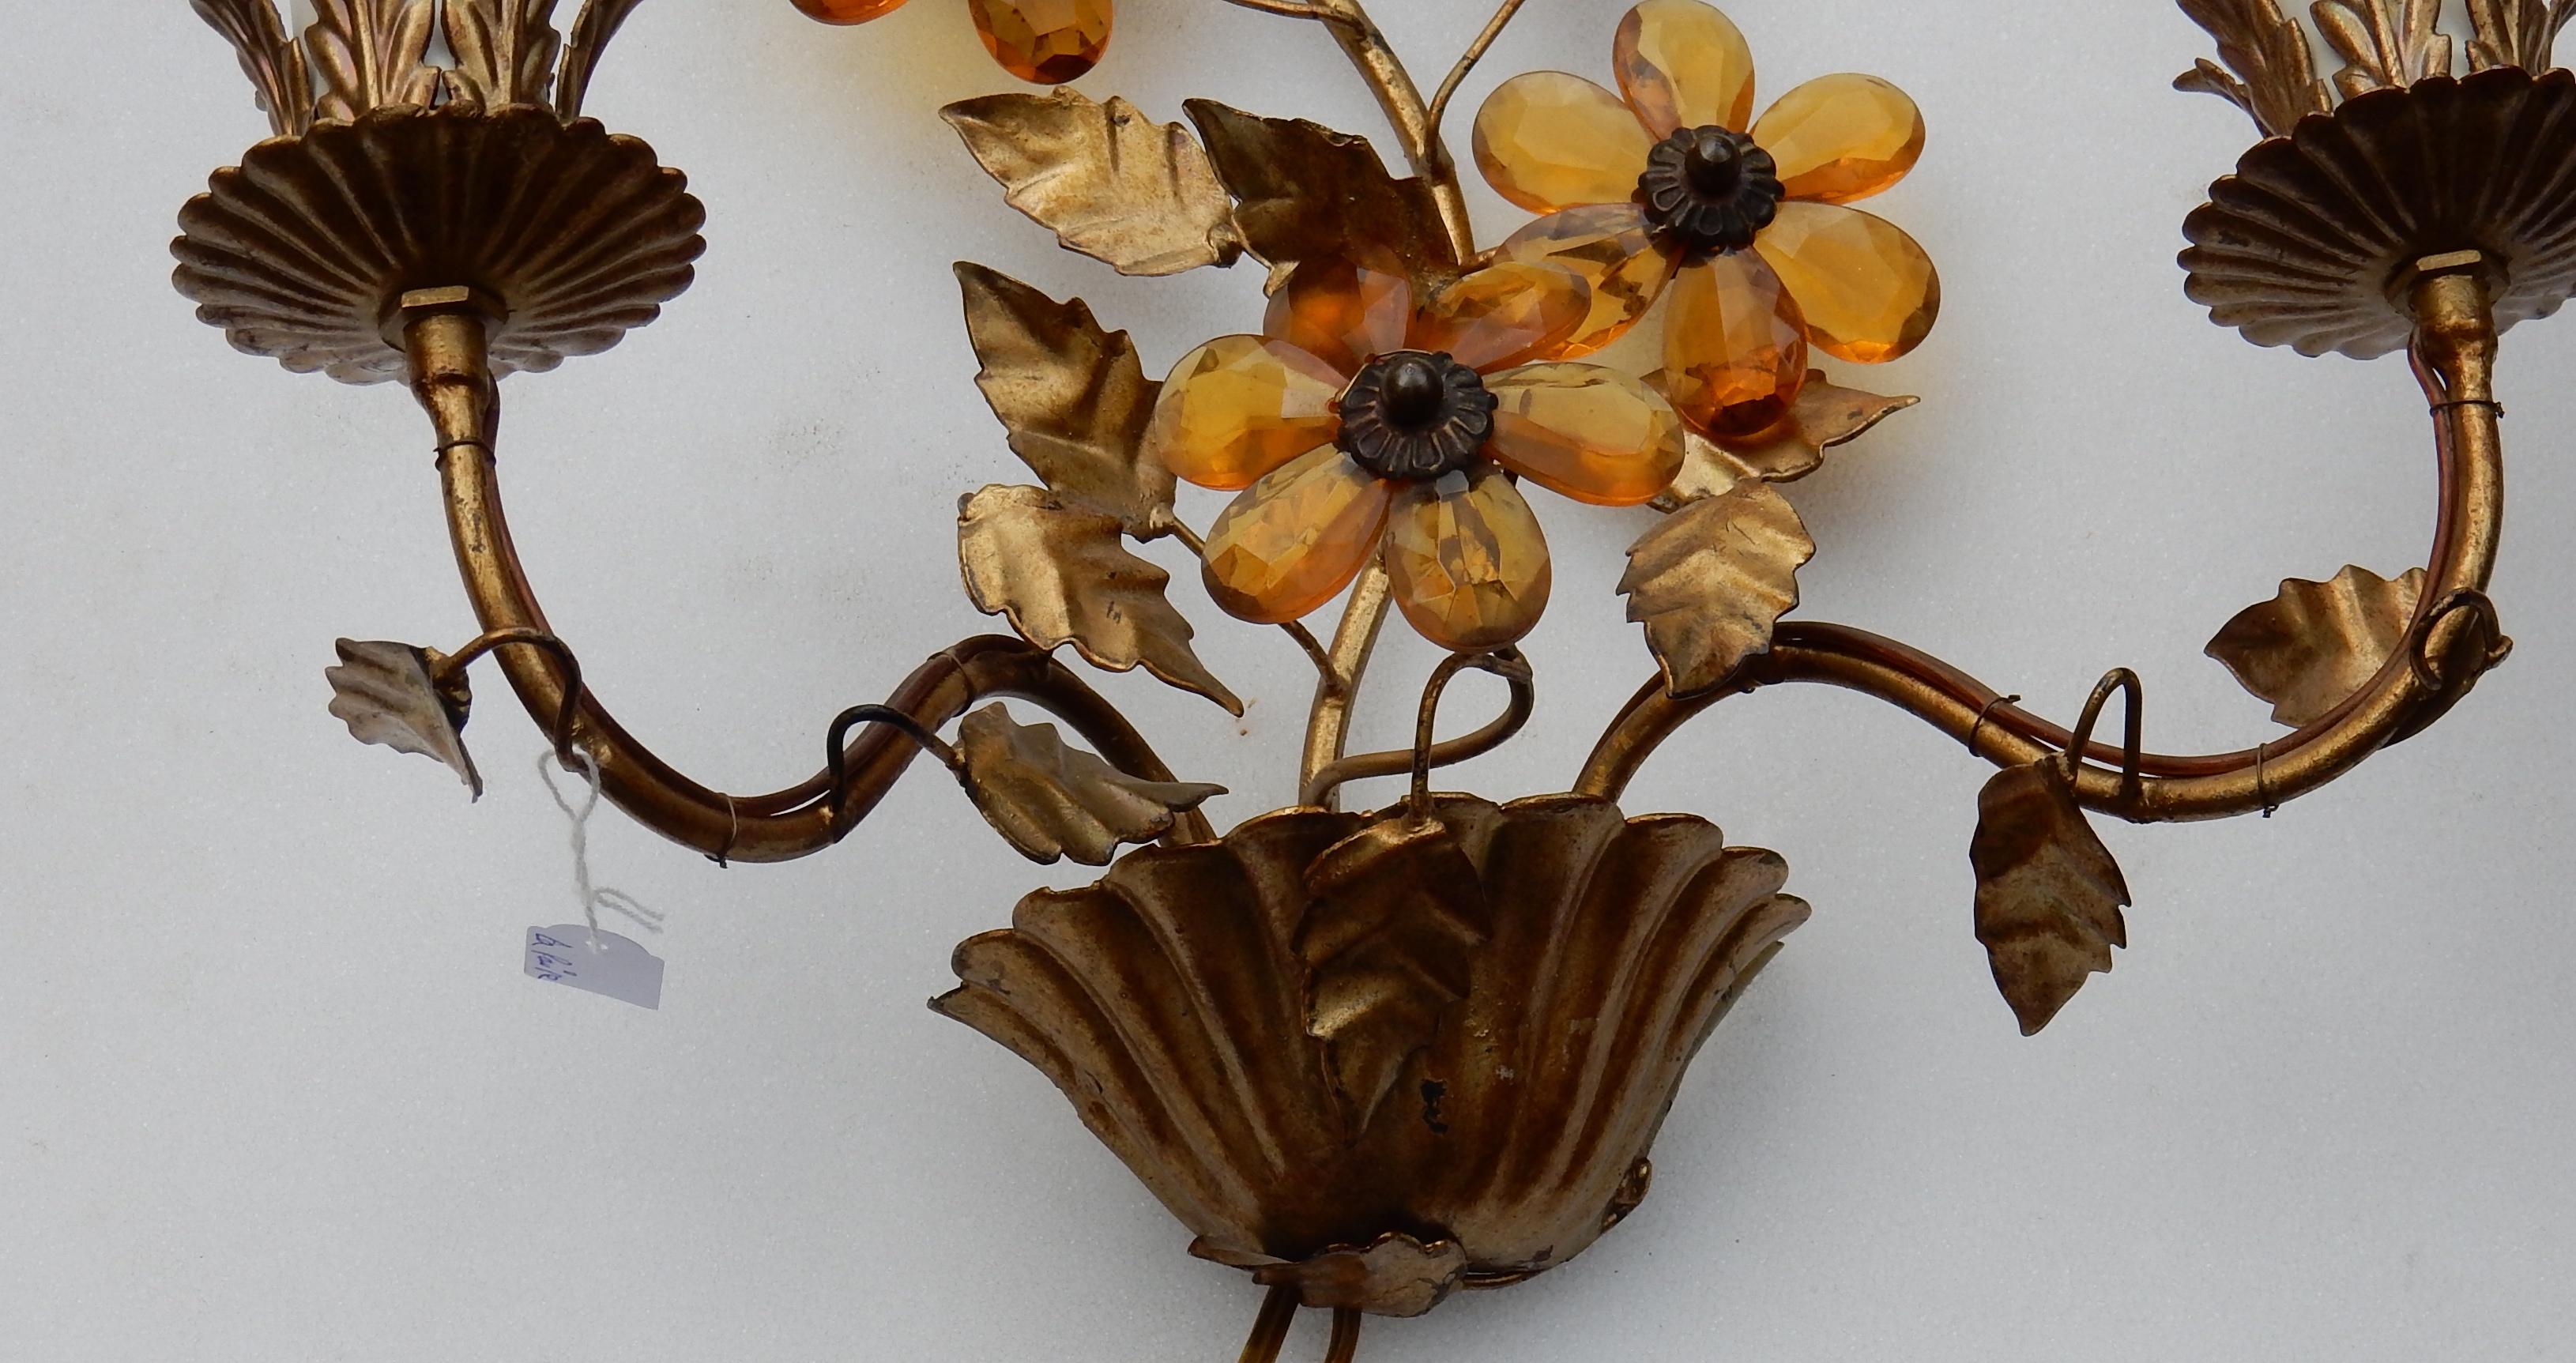 Golden metal sconces, two bulbs, flowers in glass orange color or crystal
Good condition, circa 1970.